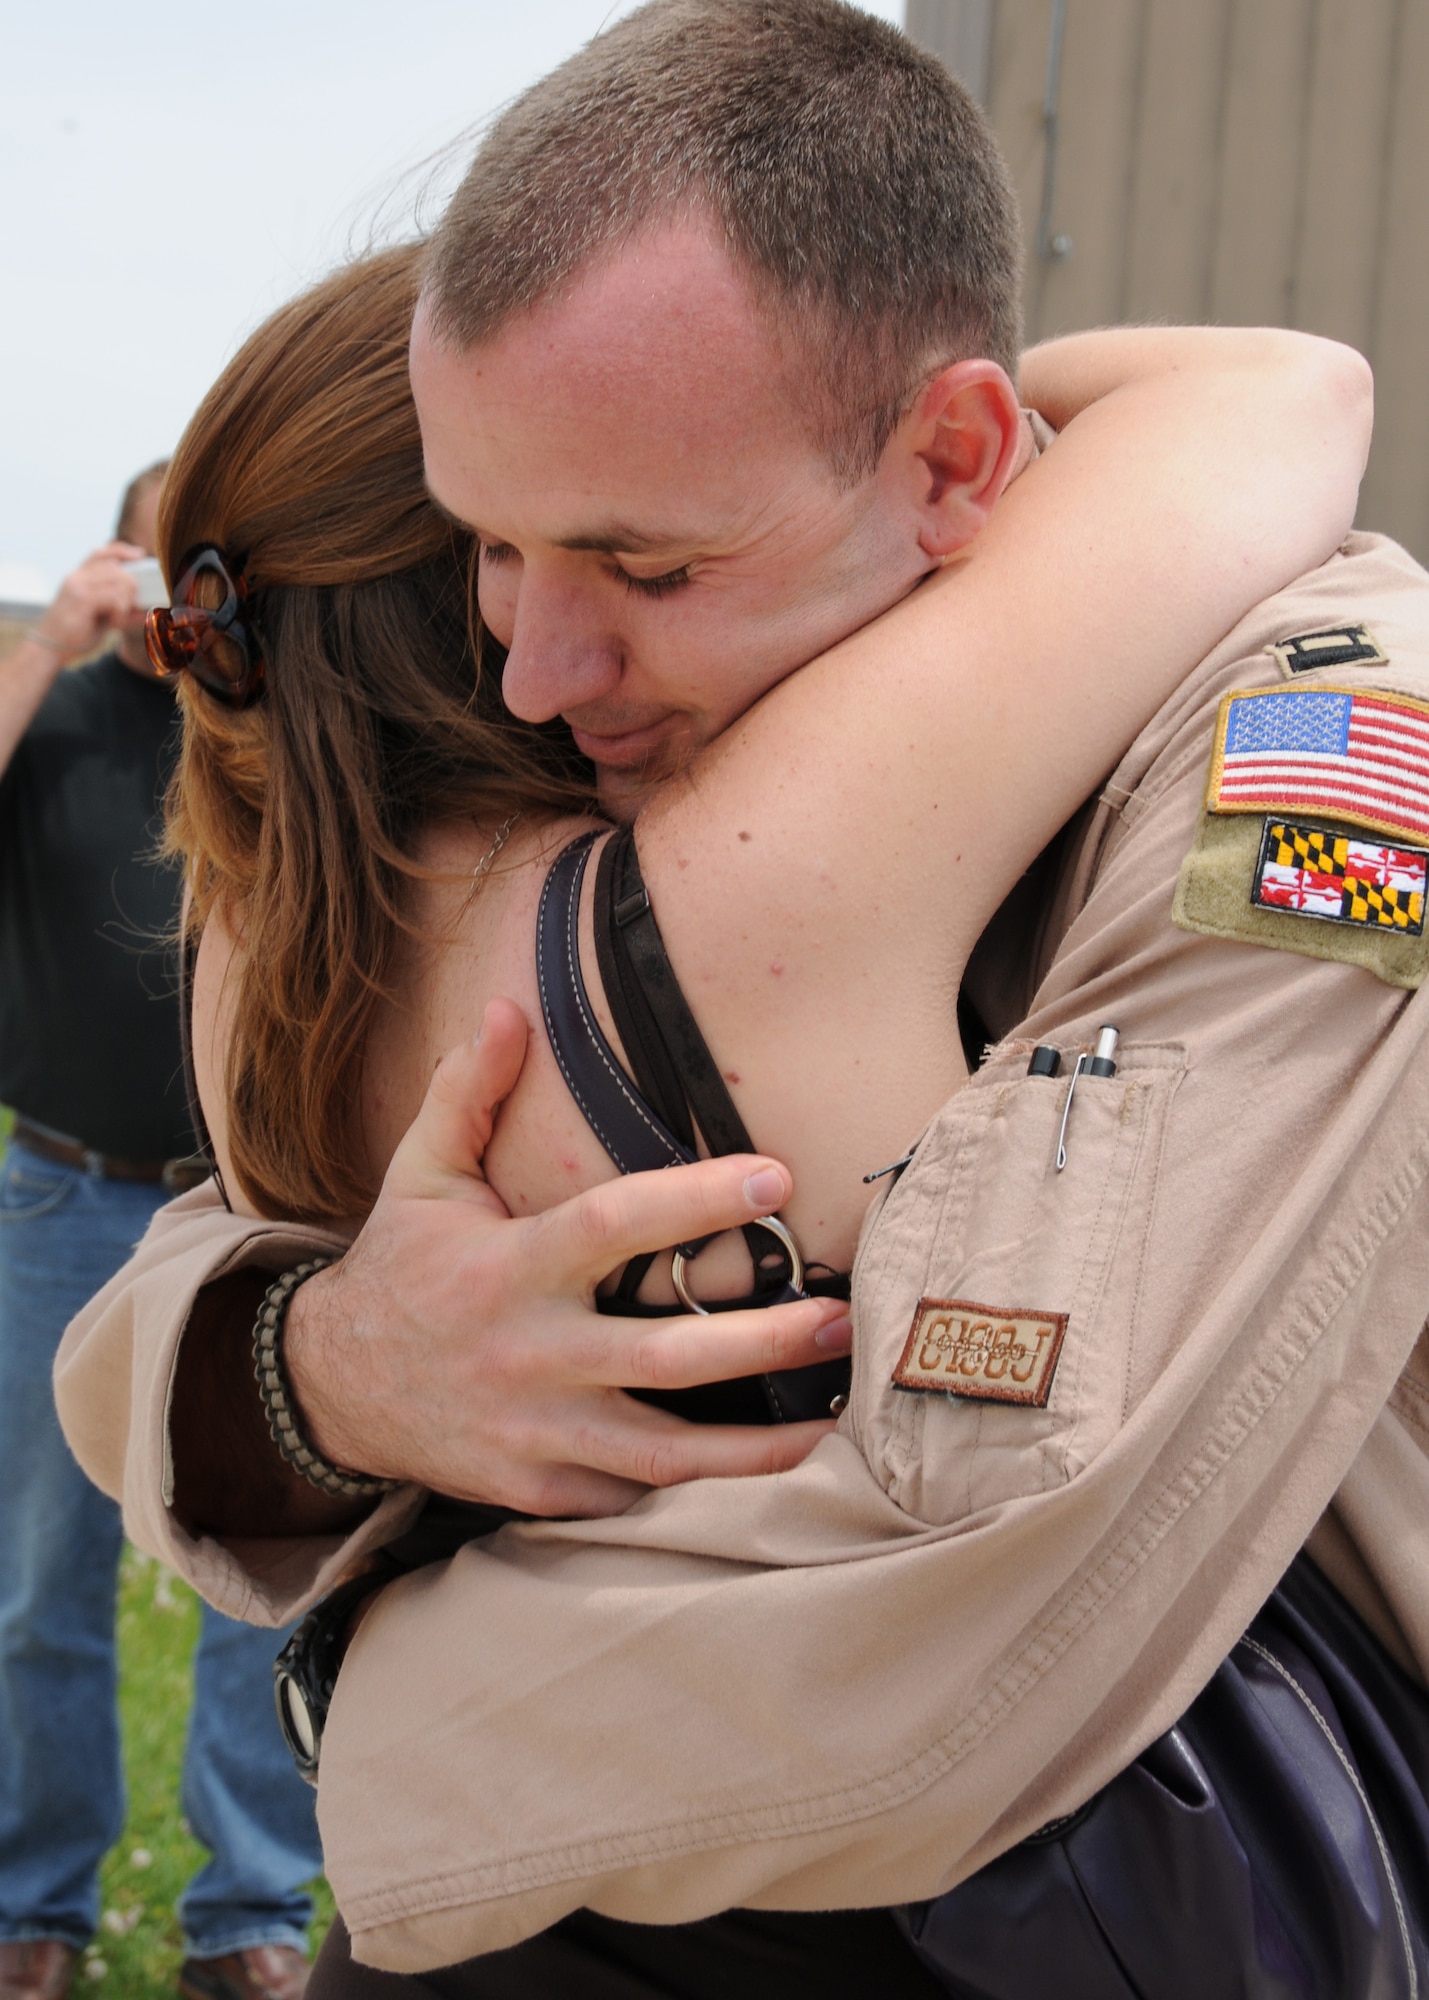 U.S. Air Force Capt. Chris Myers, a C-130J pilot with the Maryland Air National Guard, hugs his wife, Holly, on the flightline on Warfield Air National Guard Base, Baltimore, Md., May 15, 2010.  Captain Myers supported forces fighting in Afghanistan through transporting of supplies and cargo.  (U.S. Air Force photo by Staff Sgt. Benjamin Hughes/Released) 